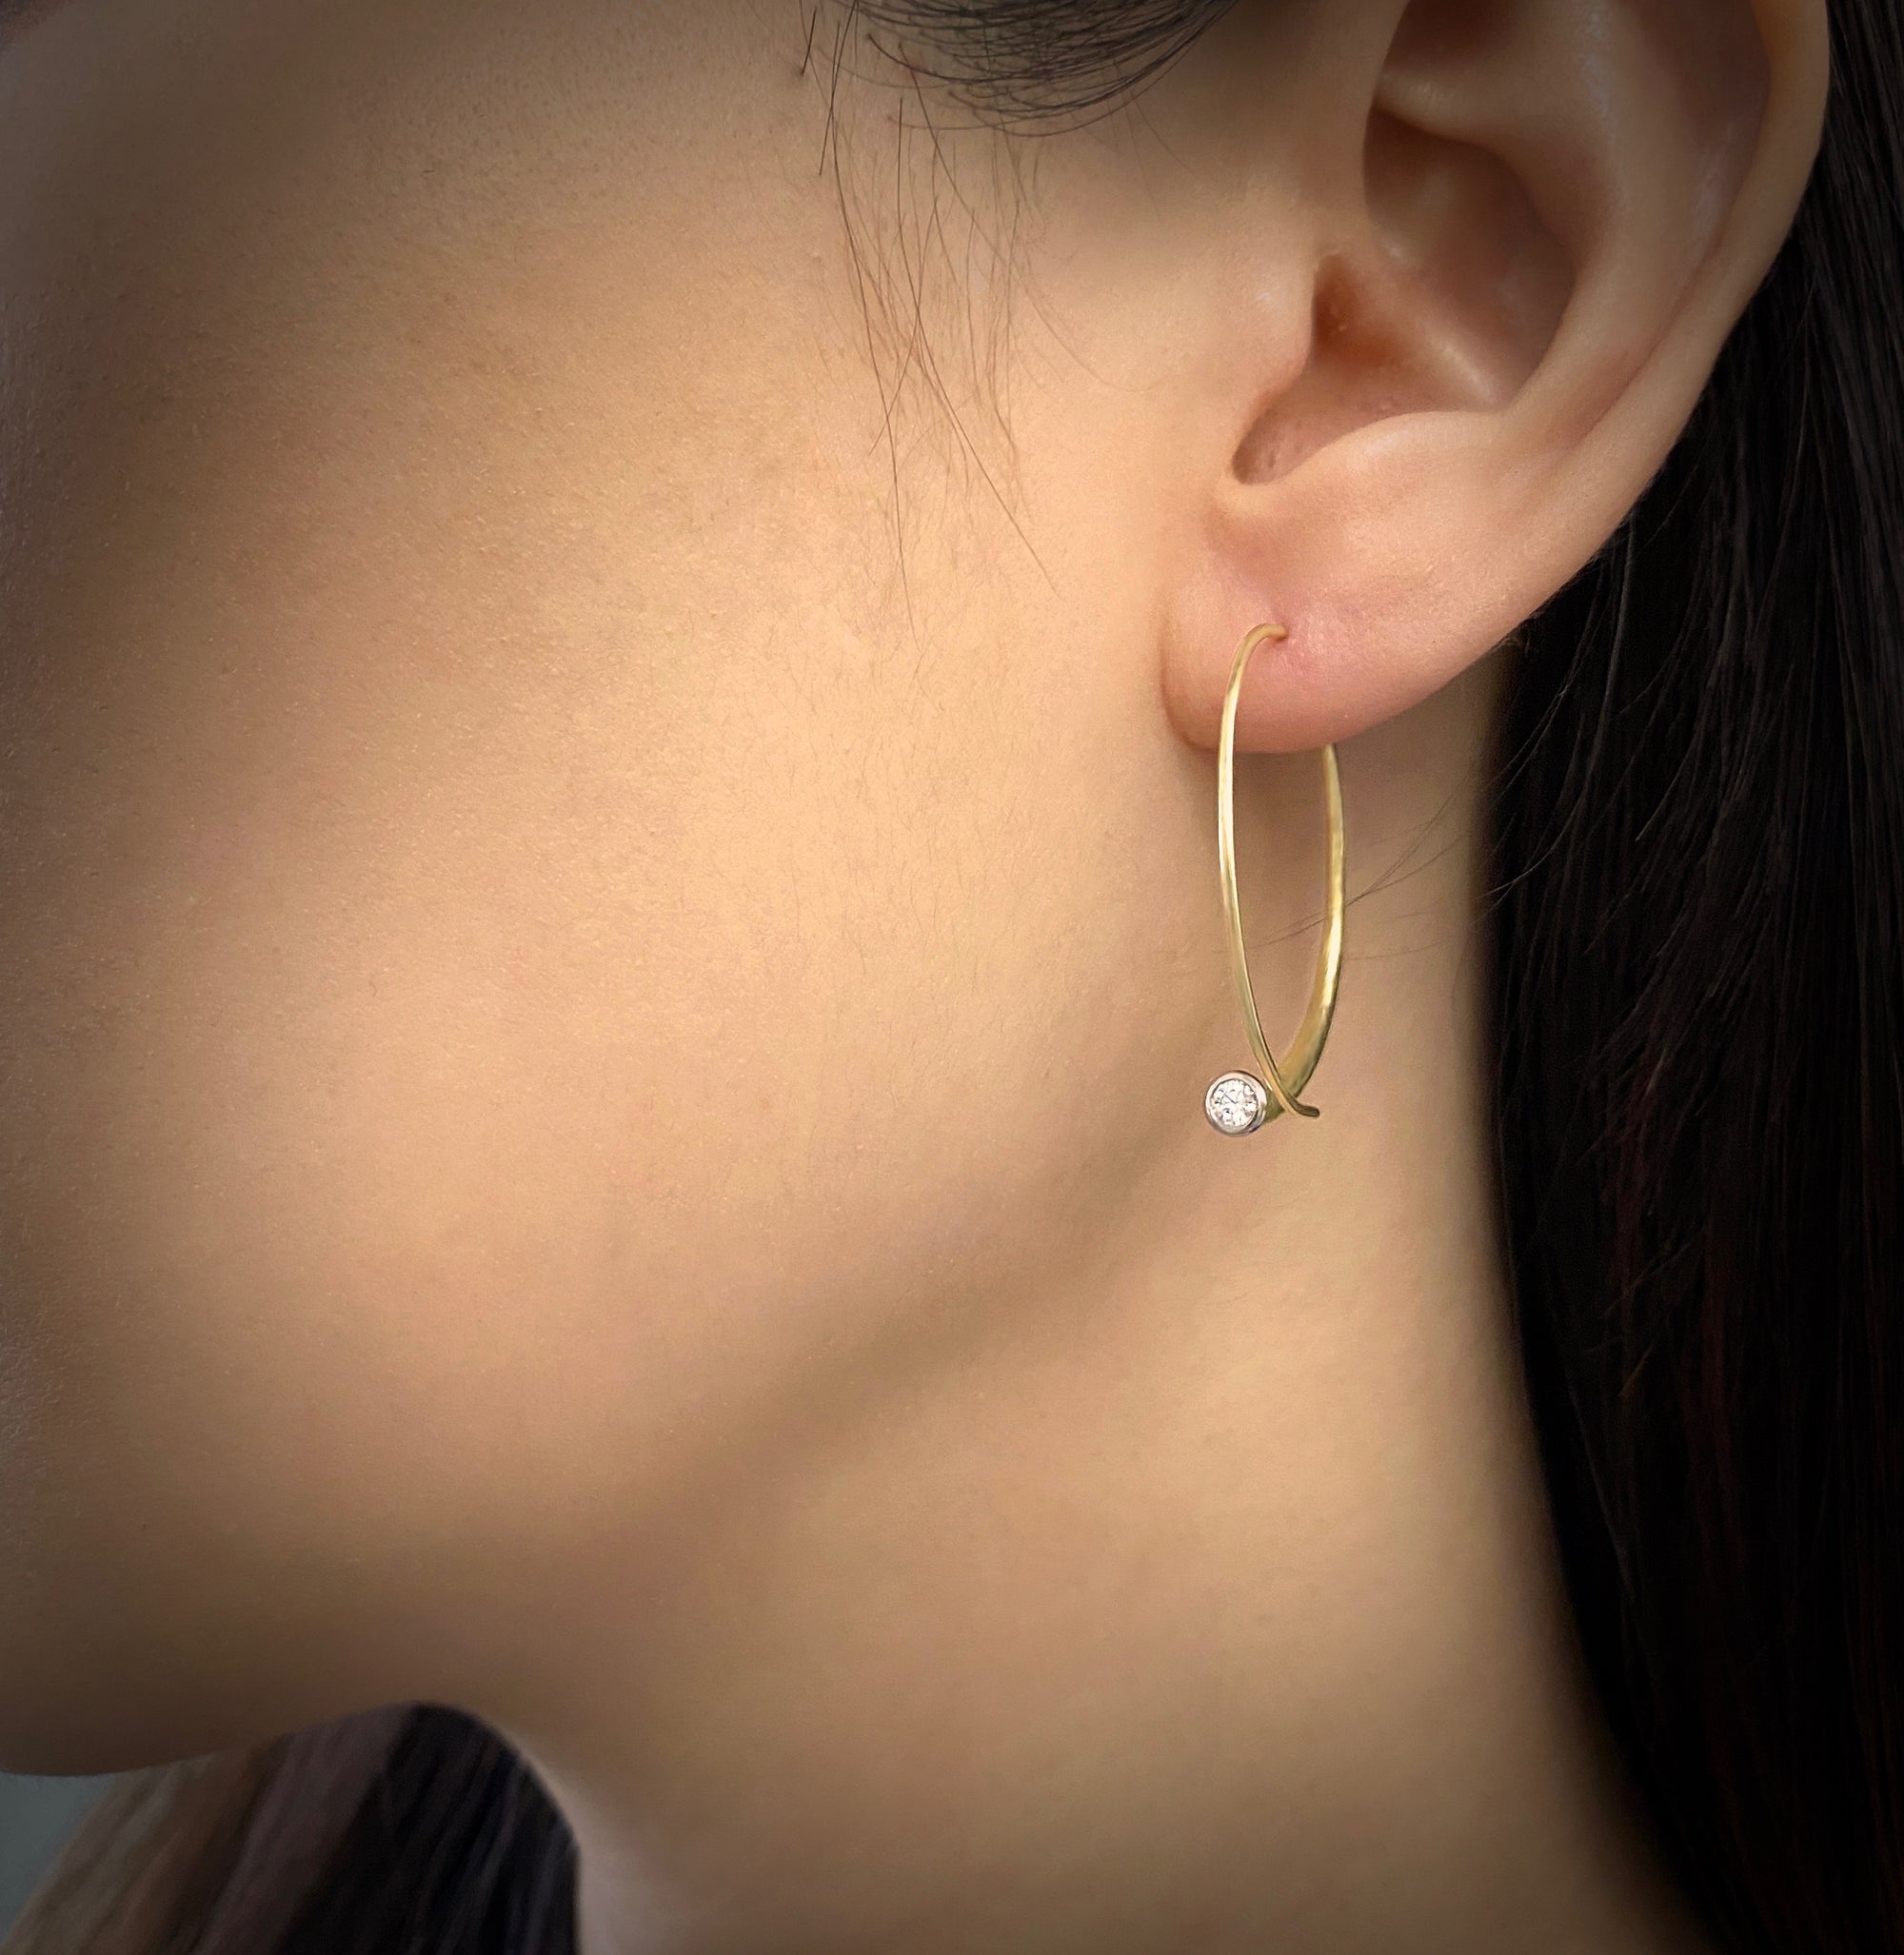 Vortex Earrings in 18K yellow gold or platinum and diamonds